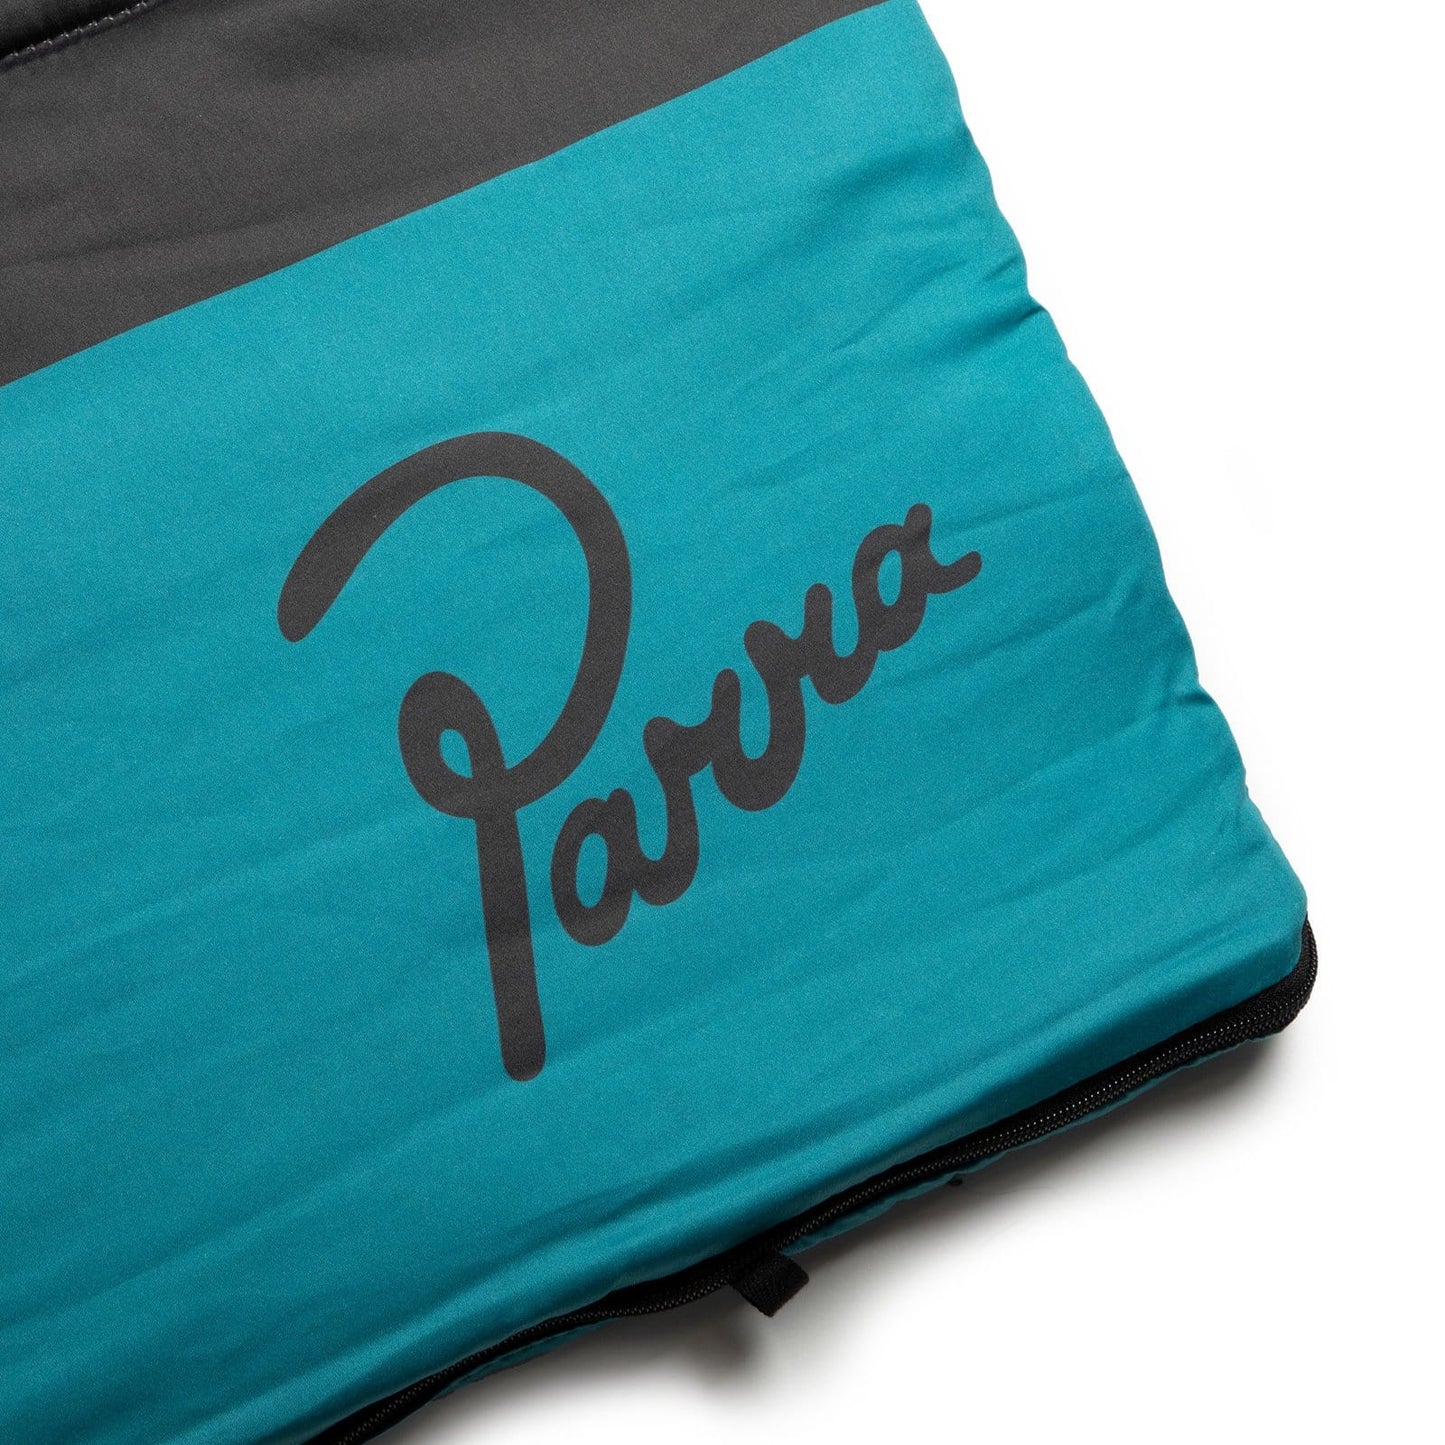 By Parra Bags & Accessories MULTI / O/S THE COMFORTING ROOM SLEEPING BAG